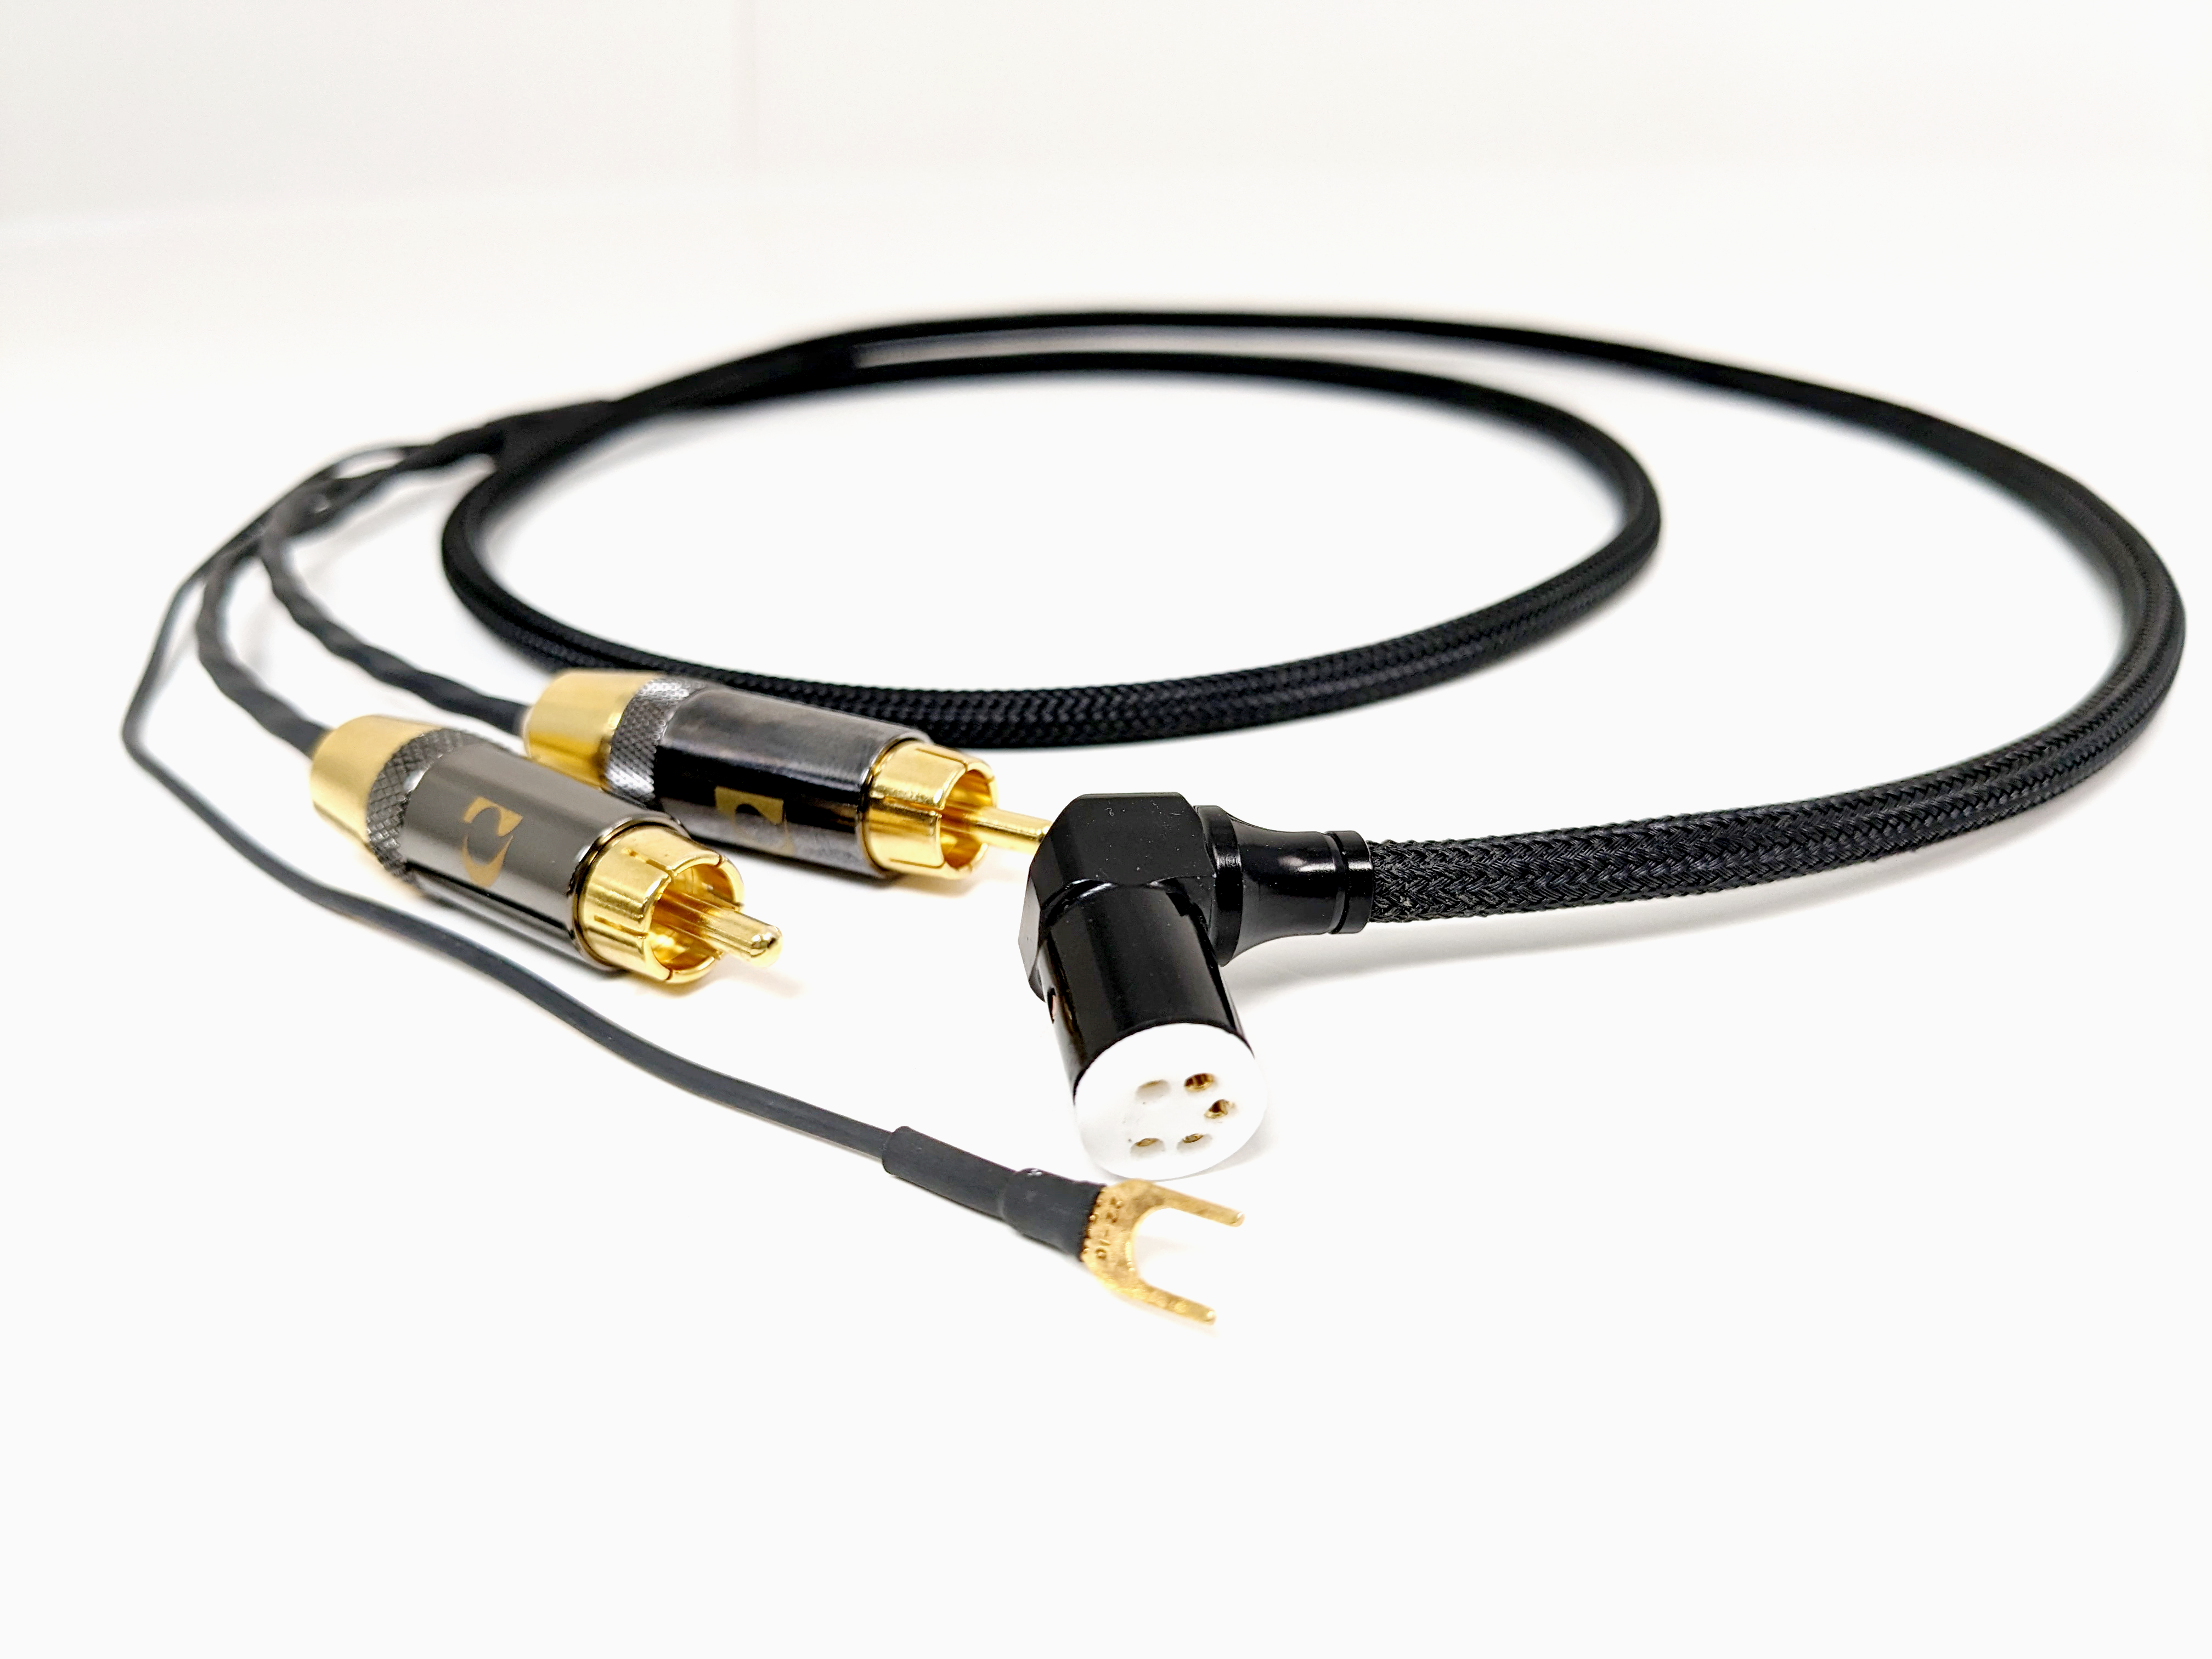 5 Pin Din Rca Cable Phono, Tonearm Cable 5 Pin Din Xlr